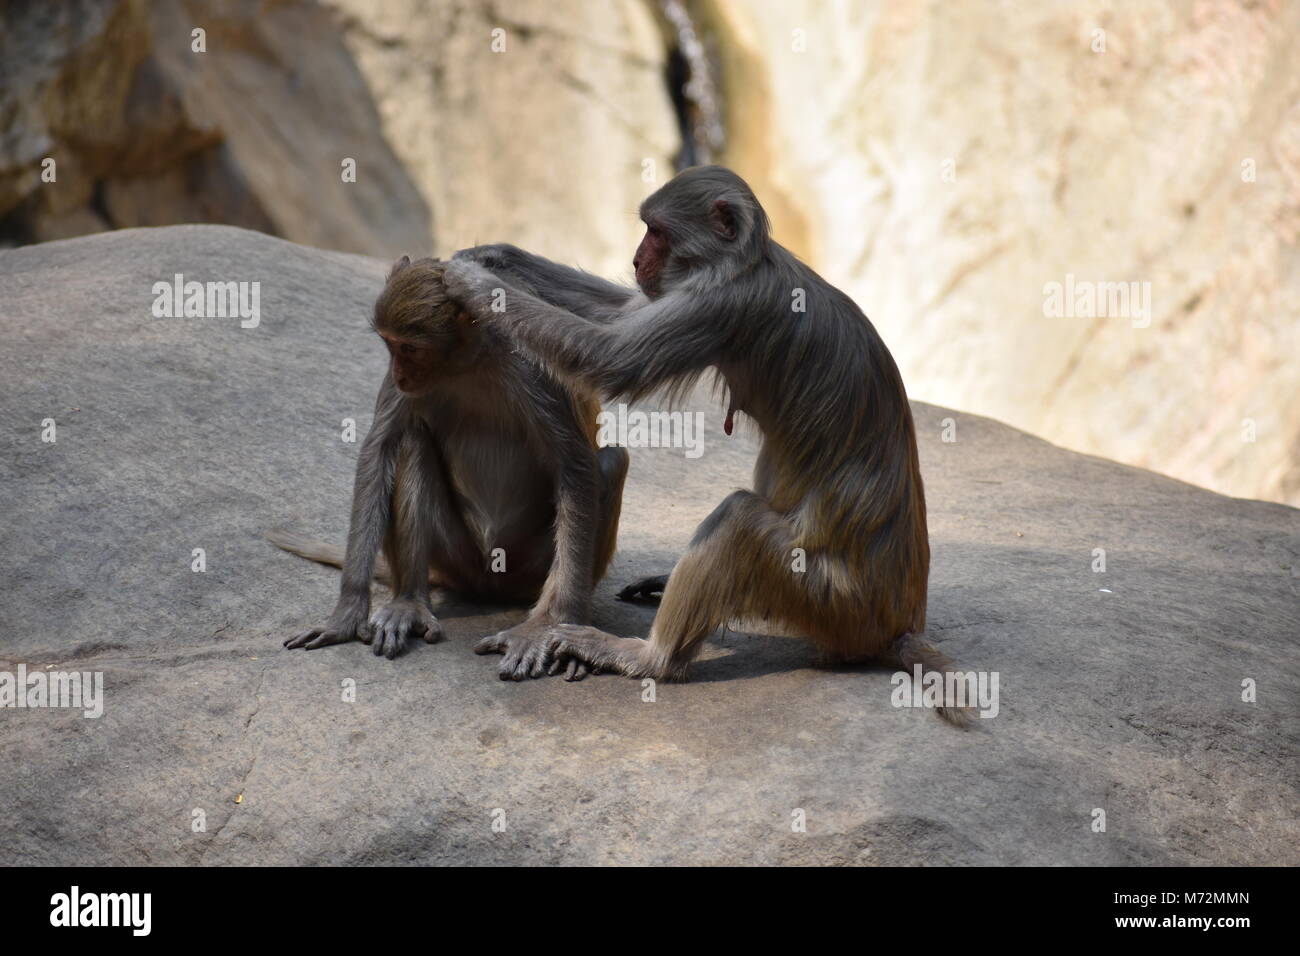 A monkey cleaning head of another monkey looking awesome picture. Stock Photo